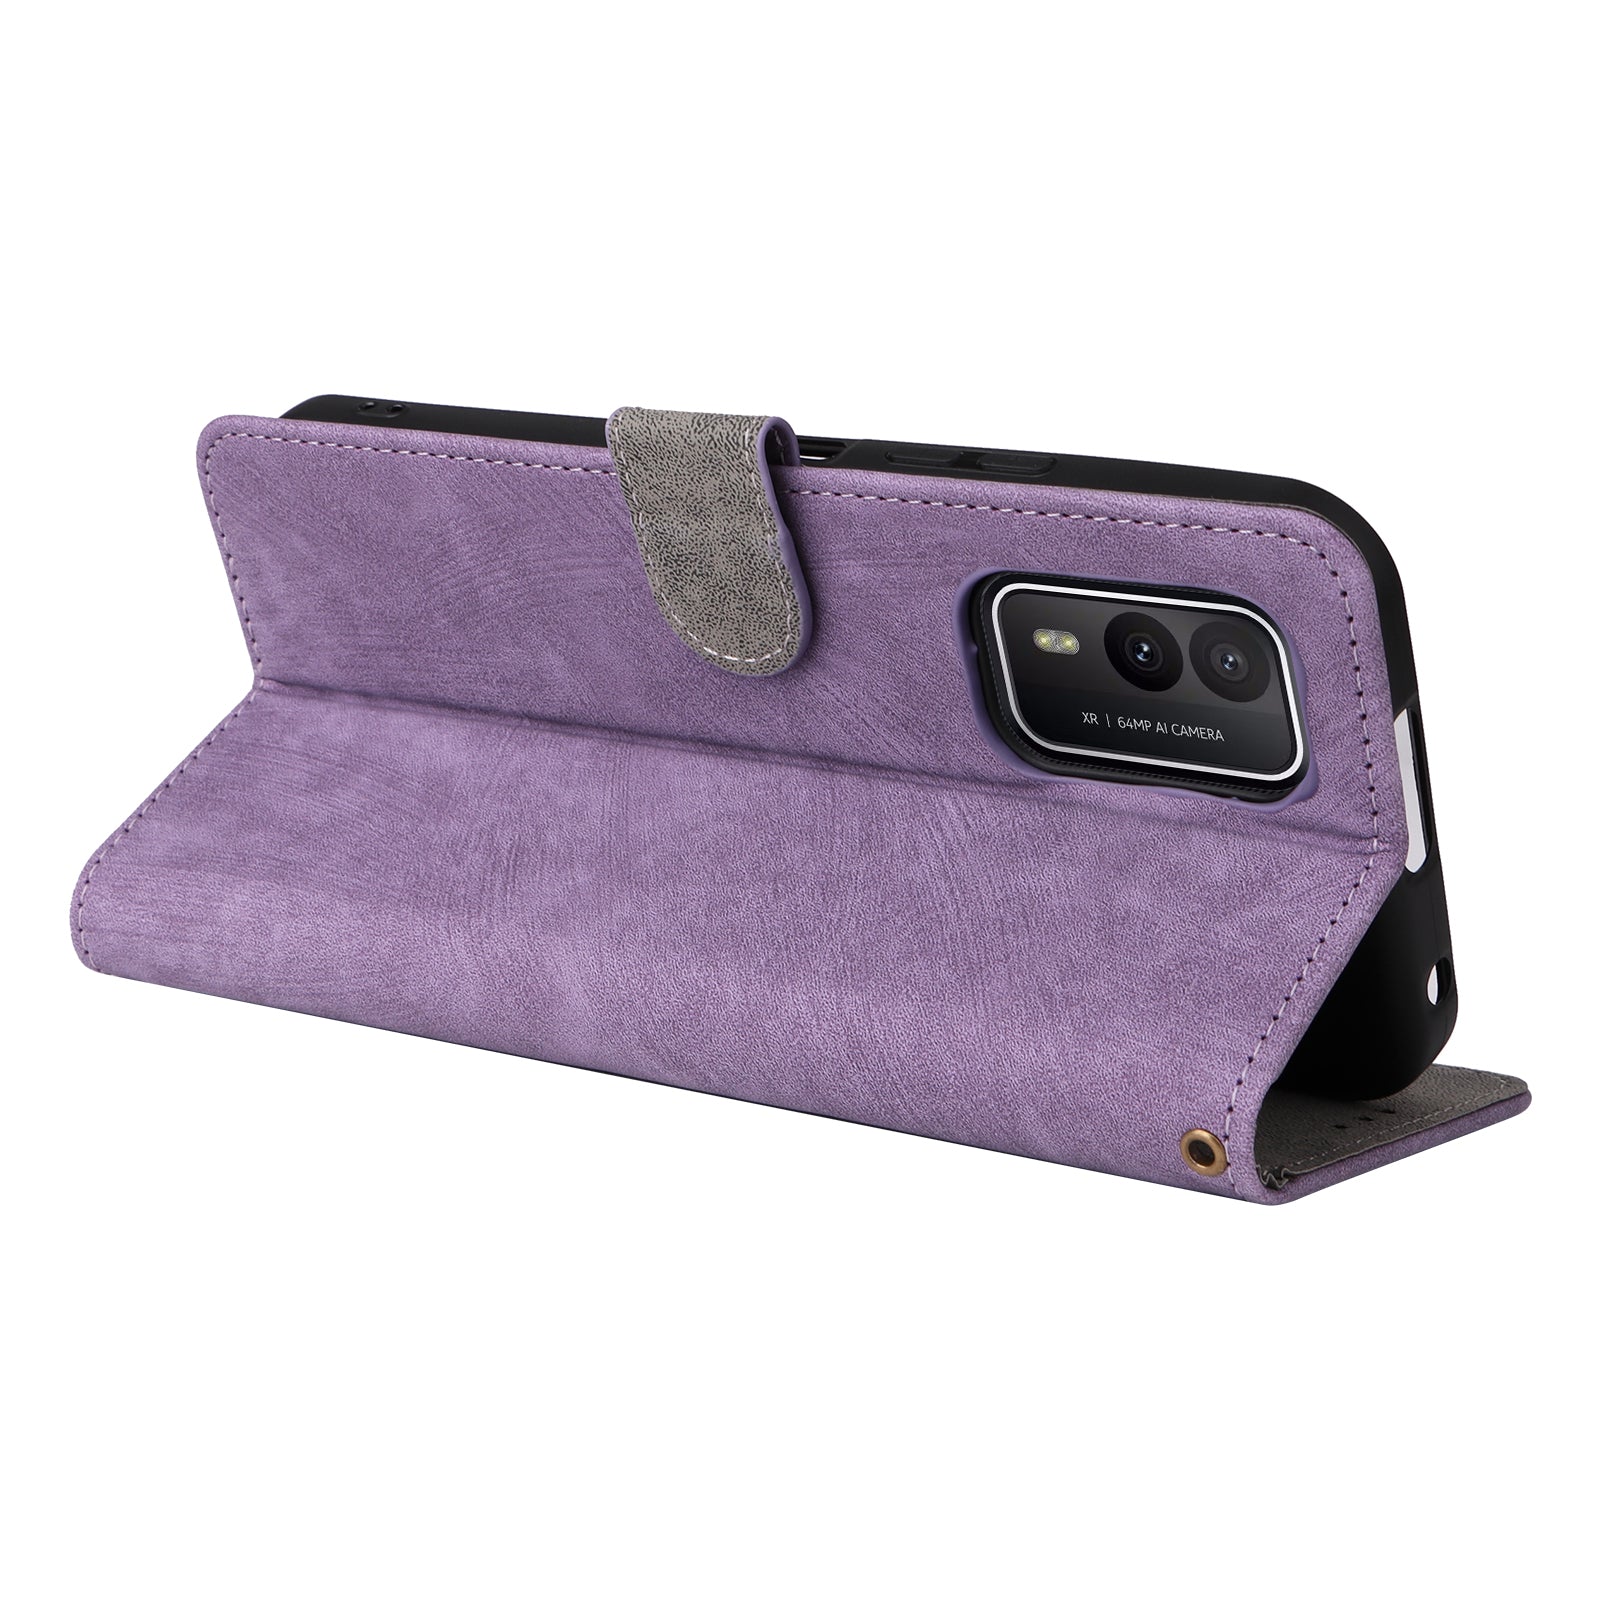 Uniqkart for Nokia XR21 RFID Blocking Phone Cover Wallet Stand Shell Shockproof Leather Case - Purple